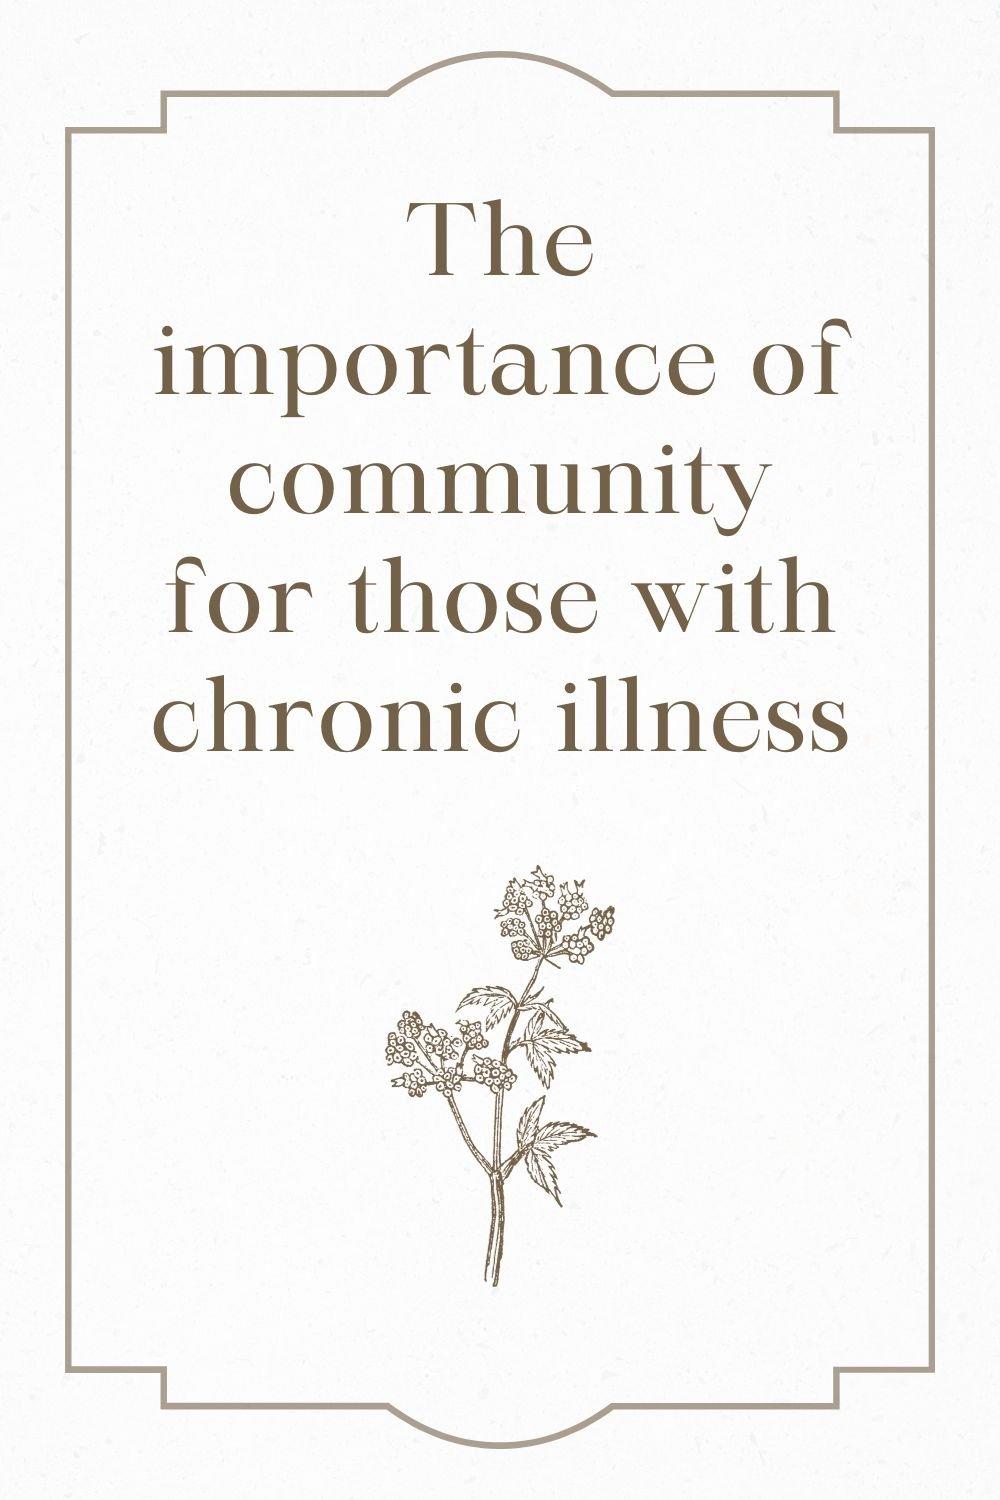 The importance of community for those with chronic illness